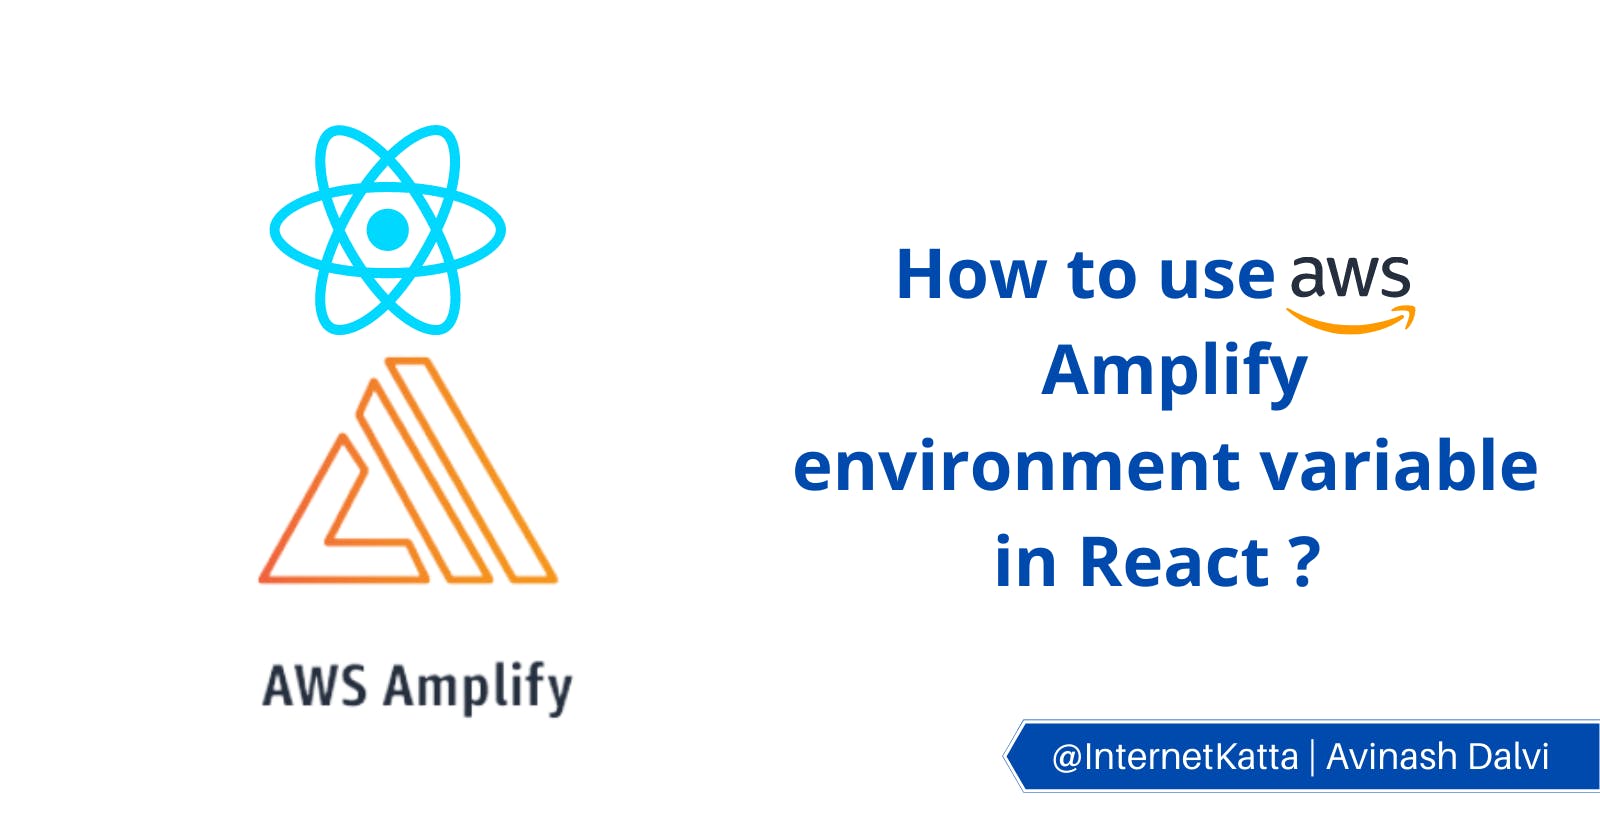 How to use AWS Amplify environment variable in React ?